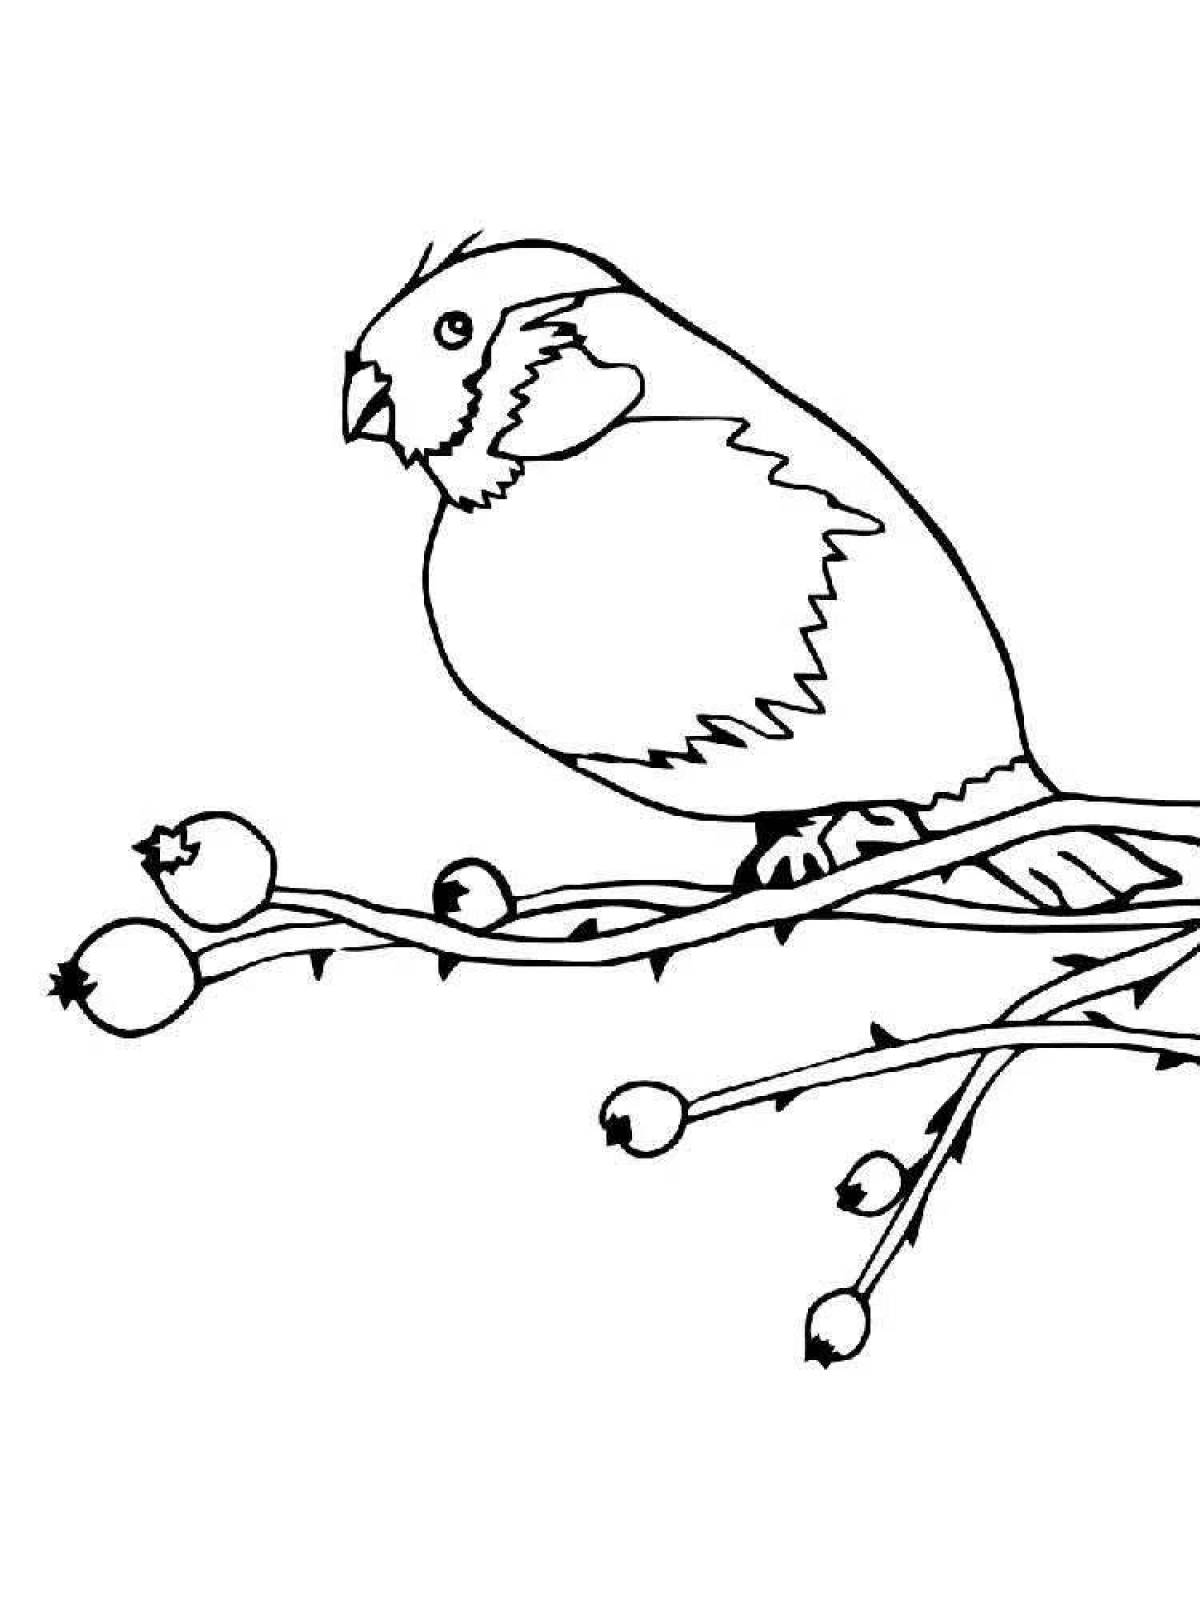 Exciting bullfinch coloring for kids